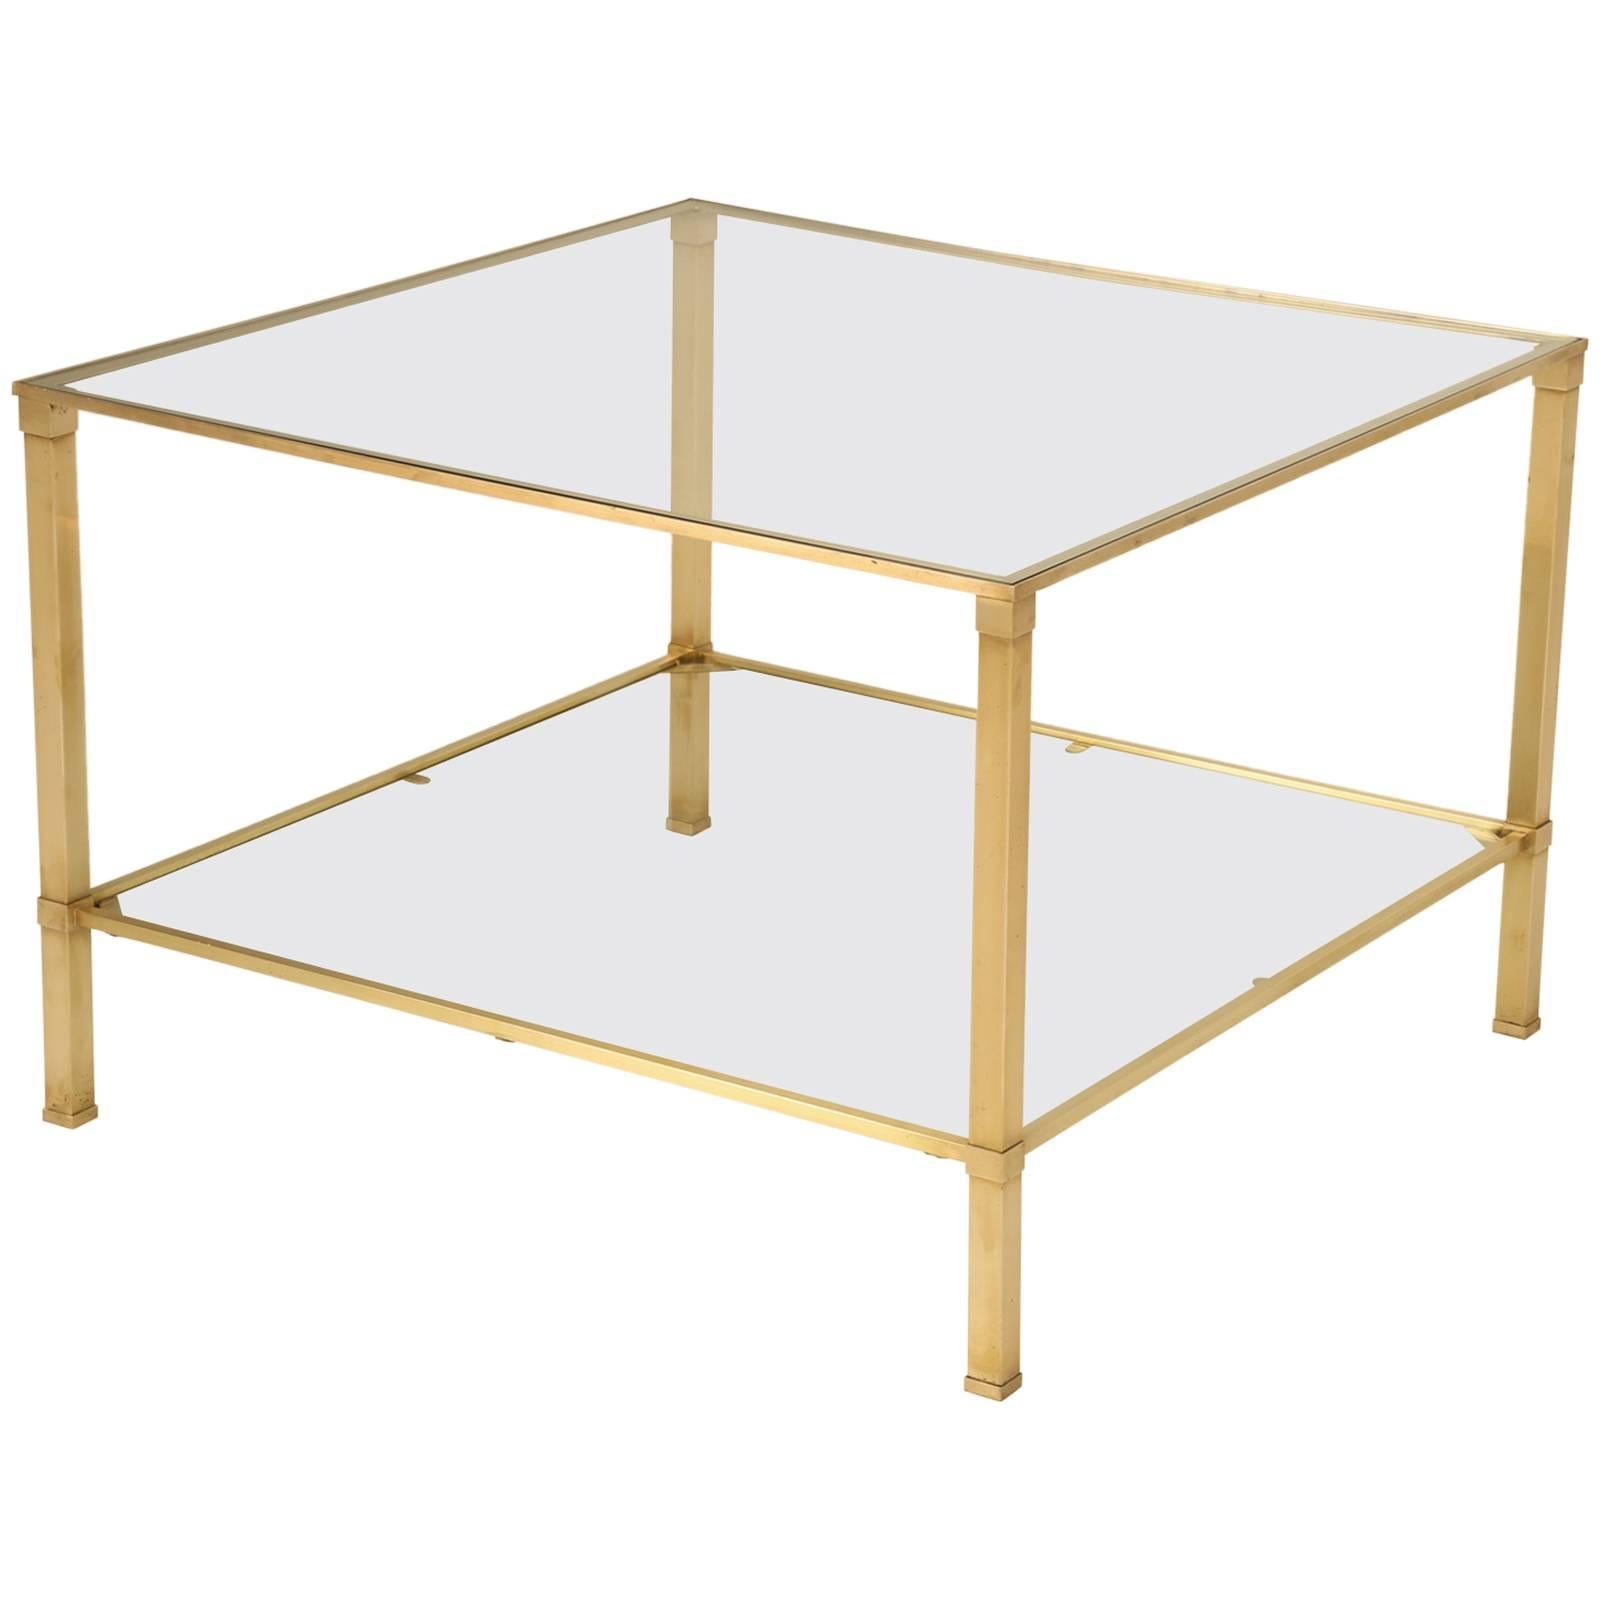 French Mid-Century Modern Side or End Table